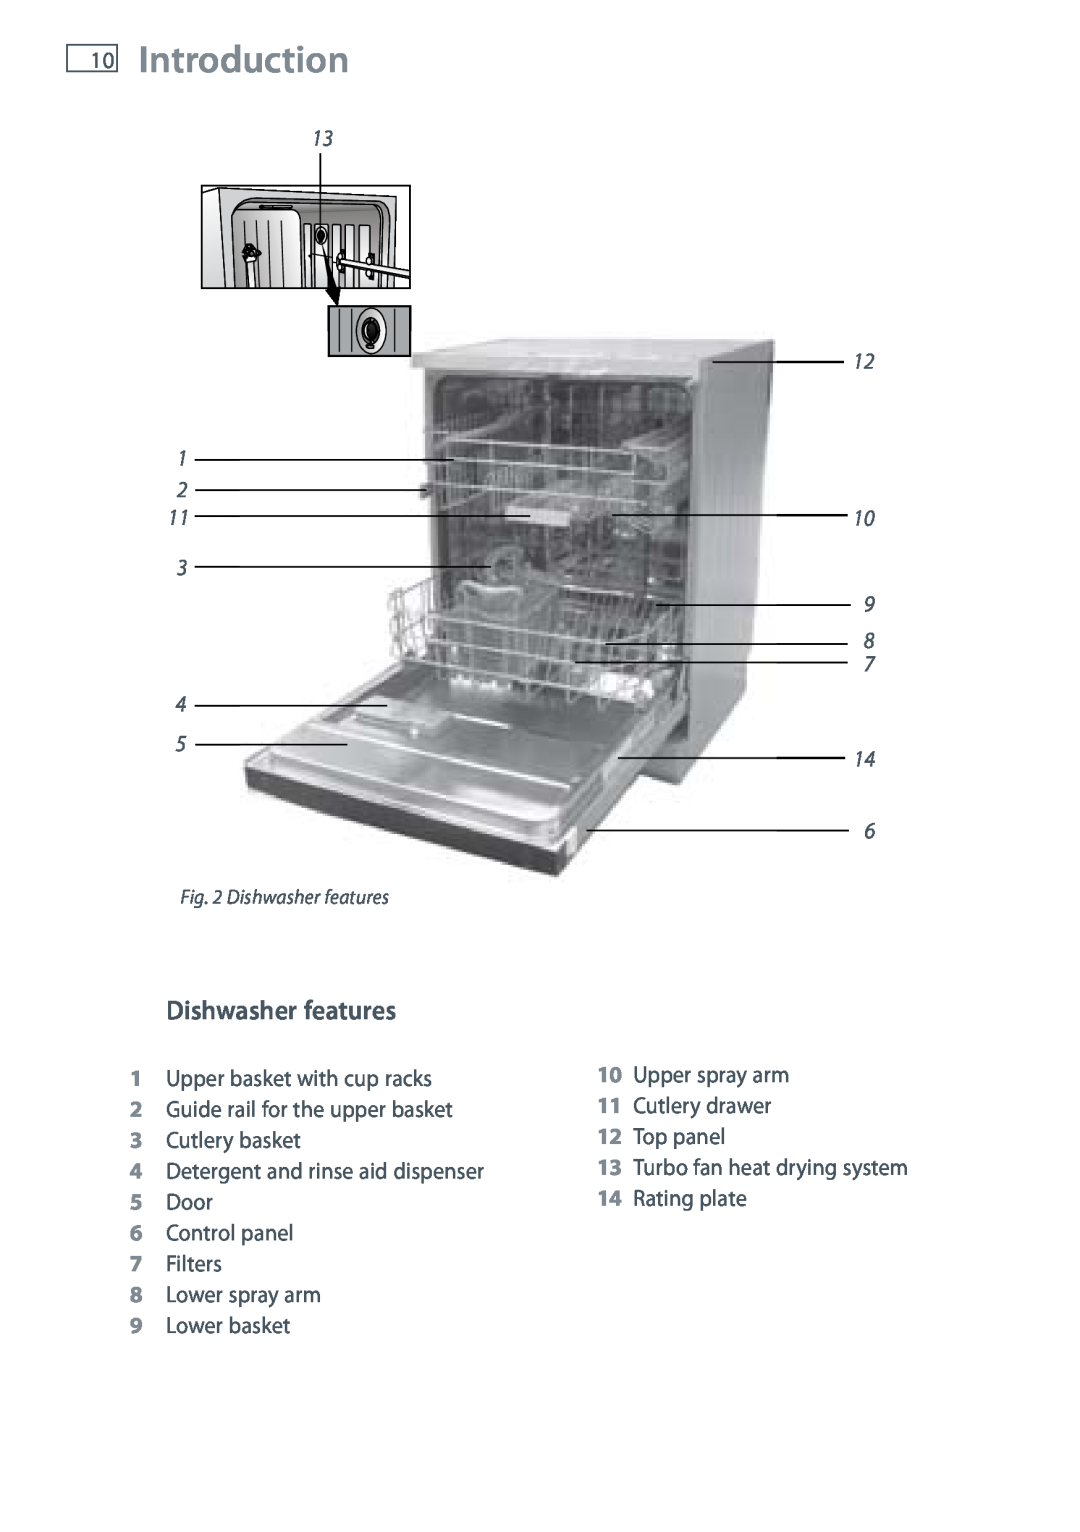 Fisher & Paykel DW60DOX installation instructions Introduction, Dishwasher features 